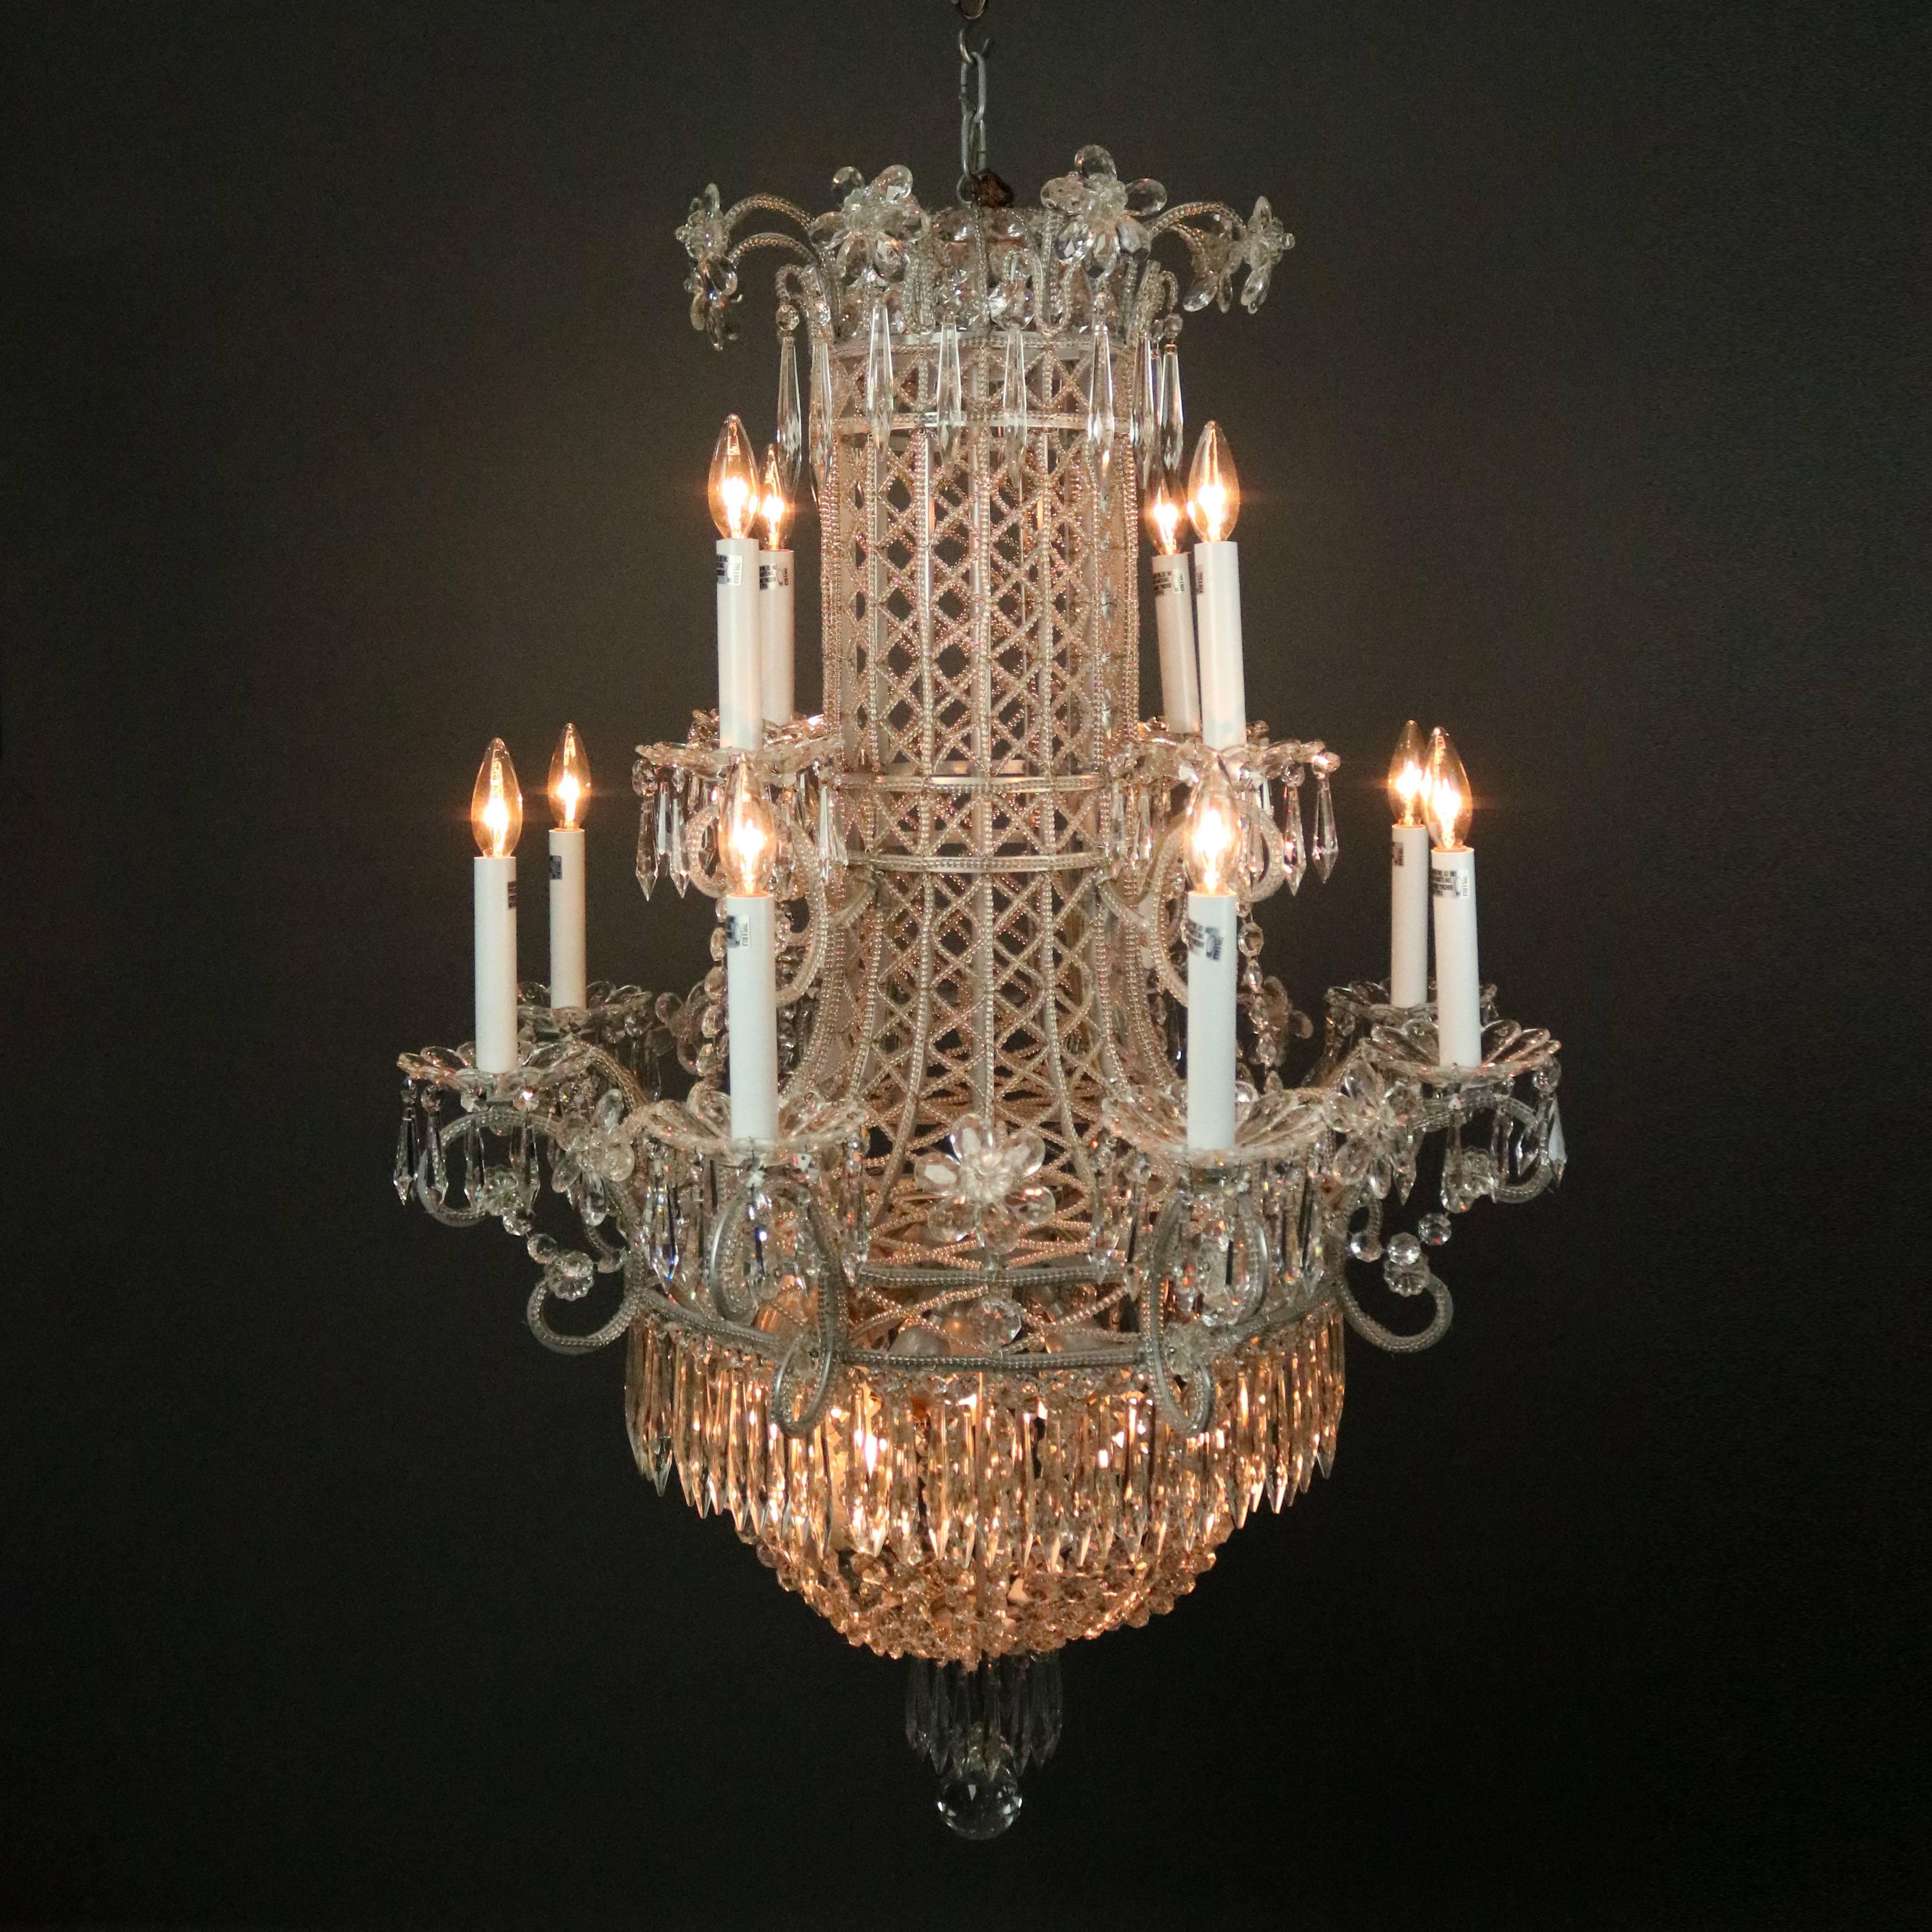 Oversized vintage French chandelier features twelve scrolled arms terminating in candle lights, strung cut crystal diaper pattern bodice, floral highlights and hanging cut crystals throughout, adjustable canopy chain, circa 1950.

Measures: 47